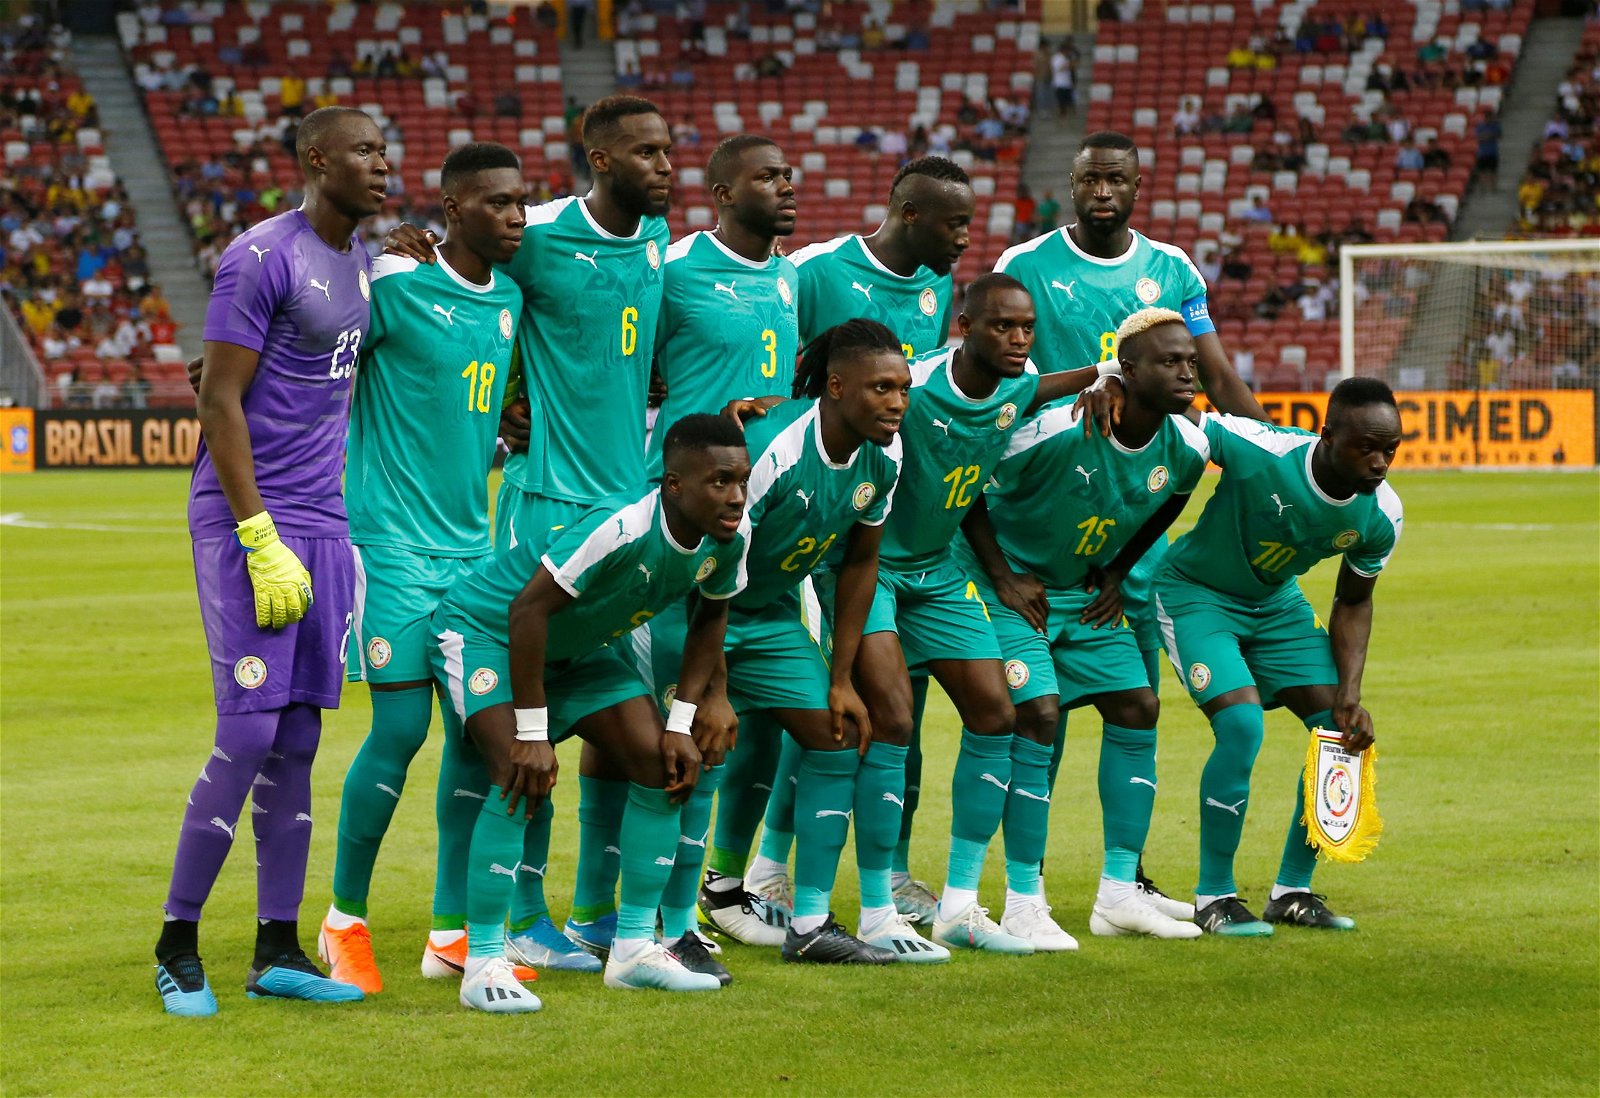 Senegal Africa Cup of Nations squad 2021